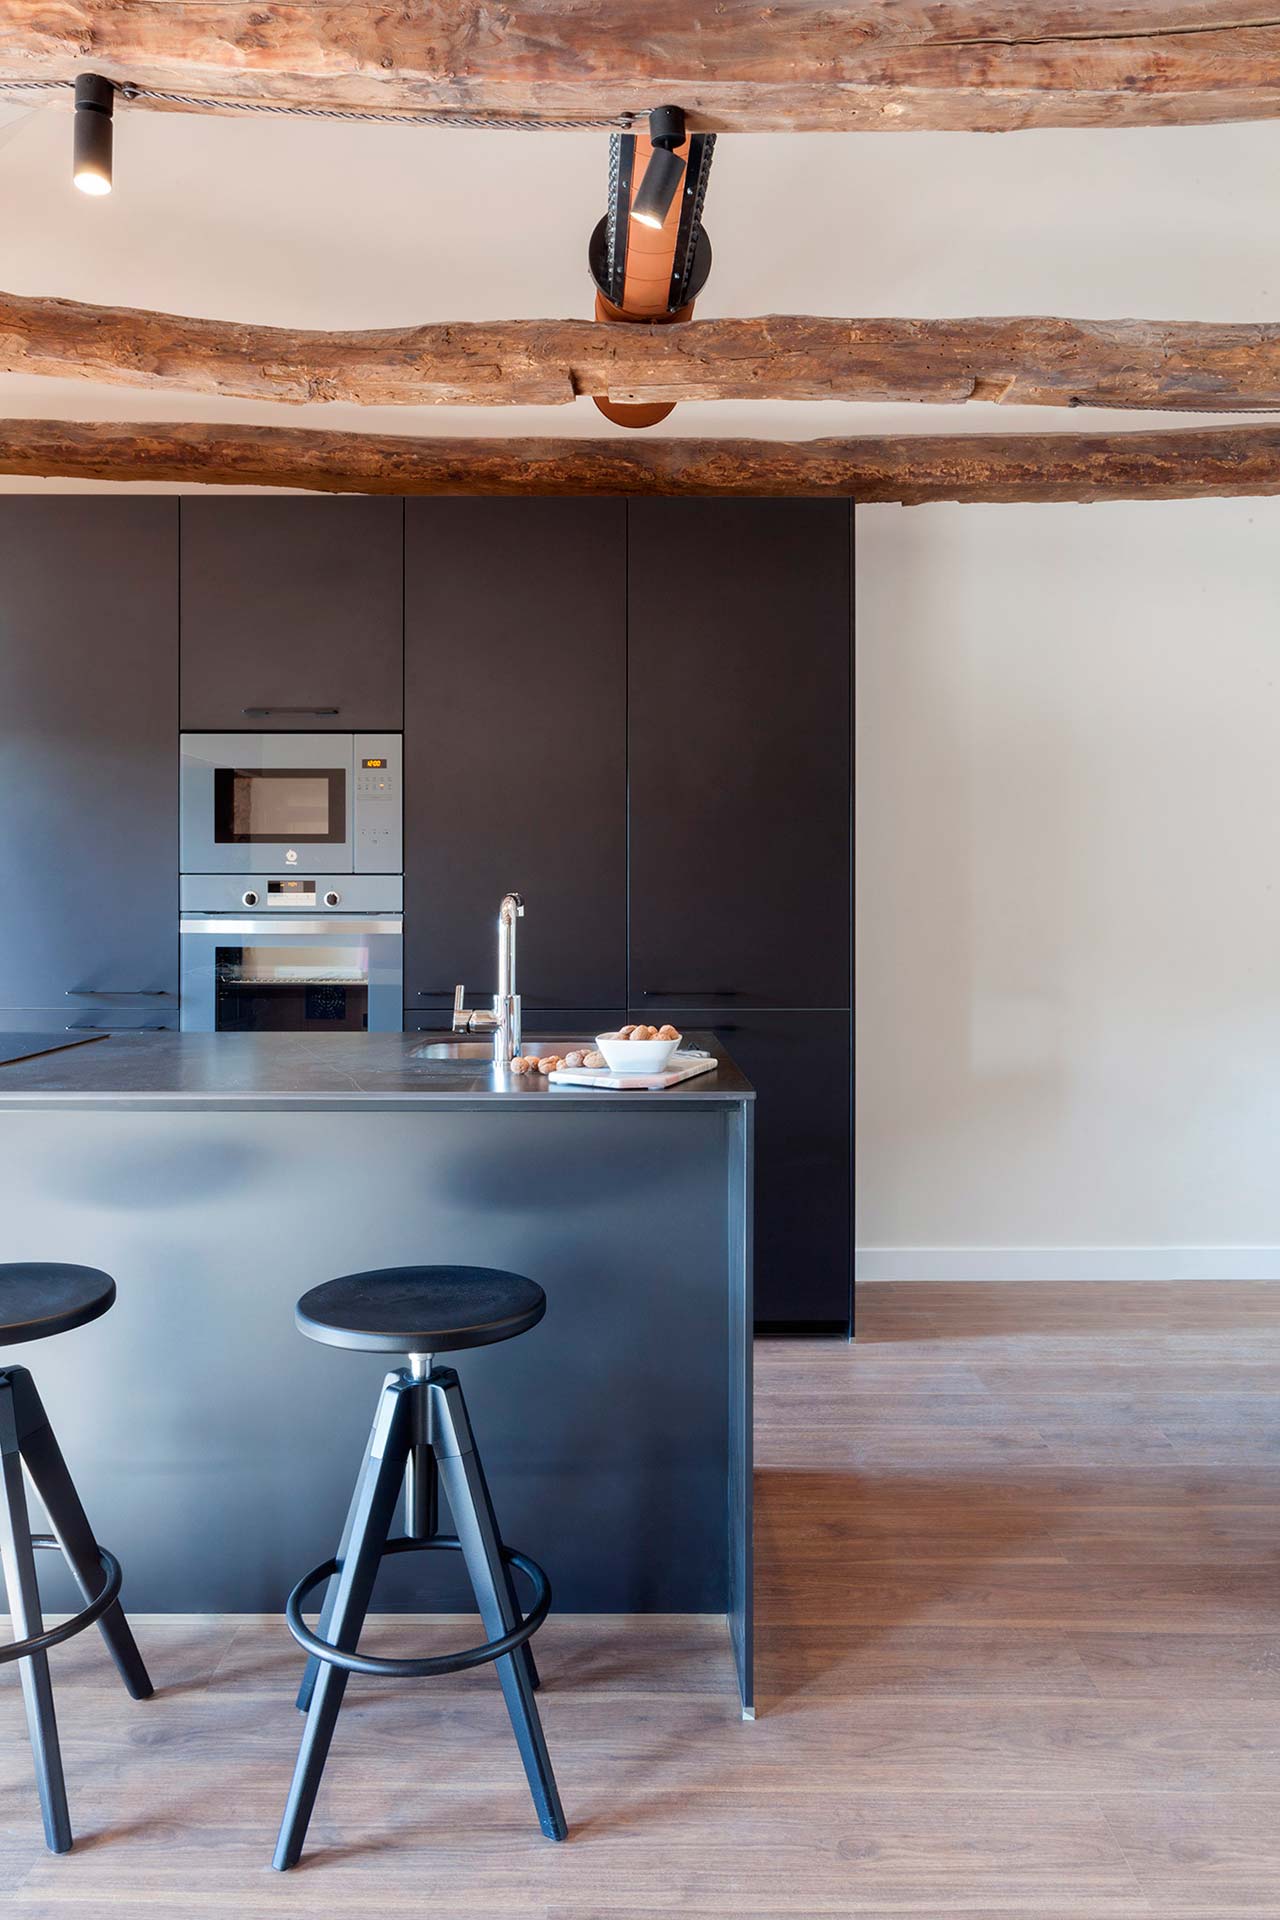 Santos Kitchens in renovated homes, by Andrea Muñoz Diseño